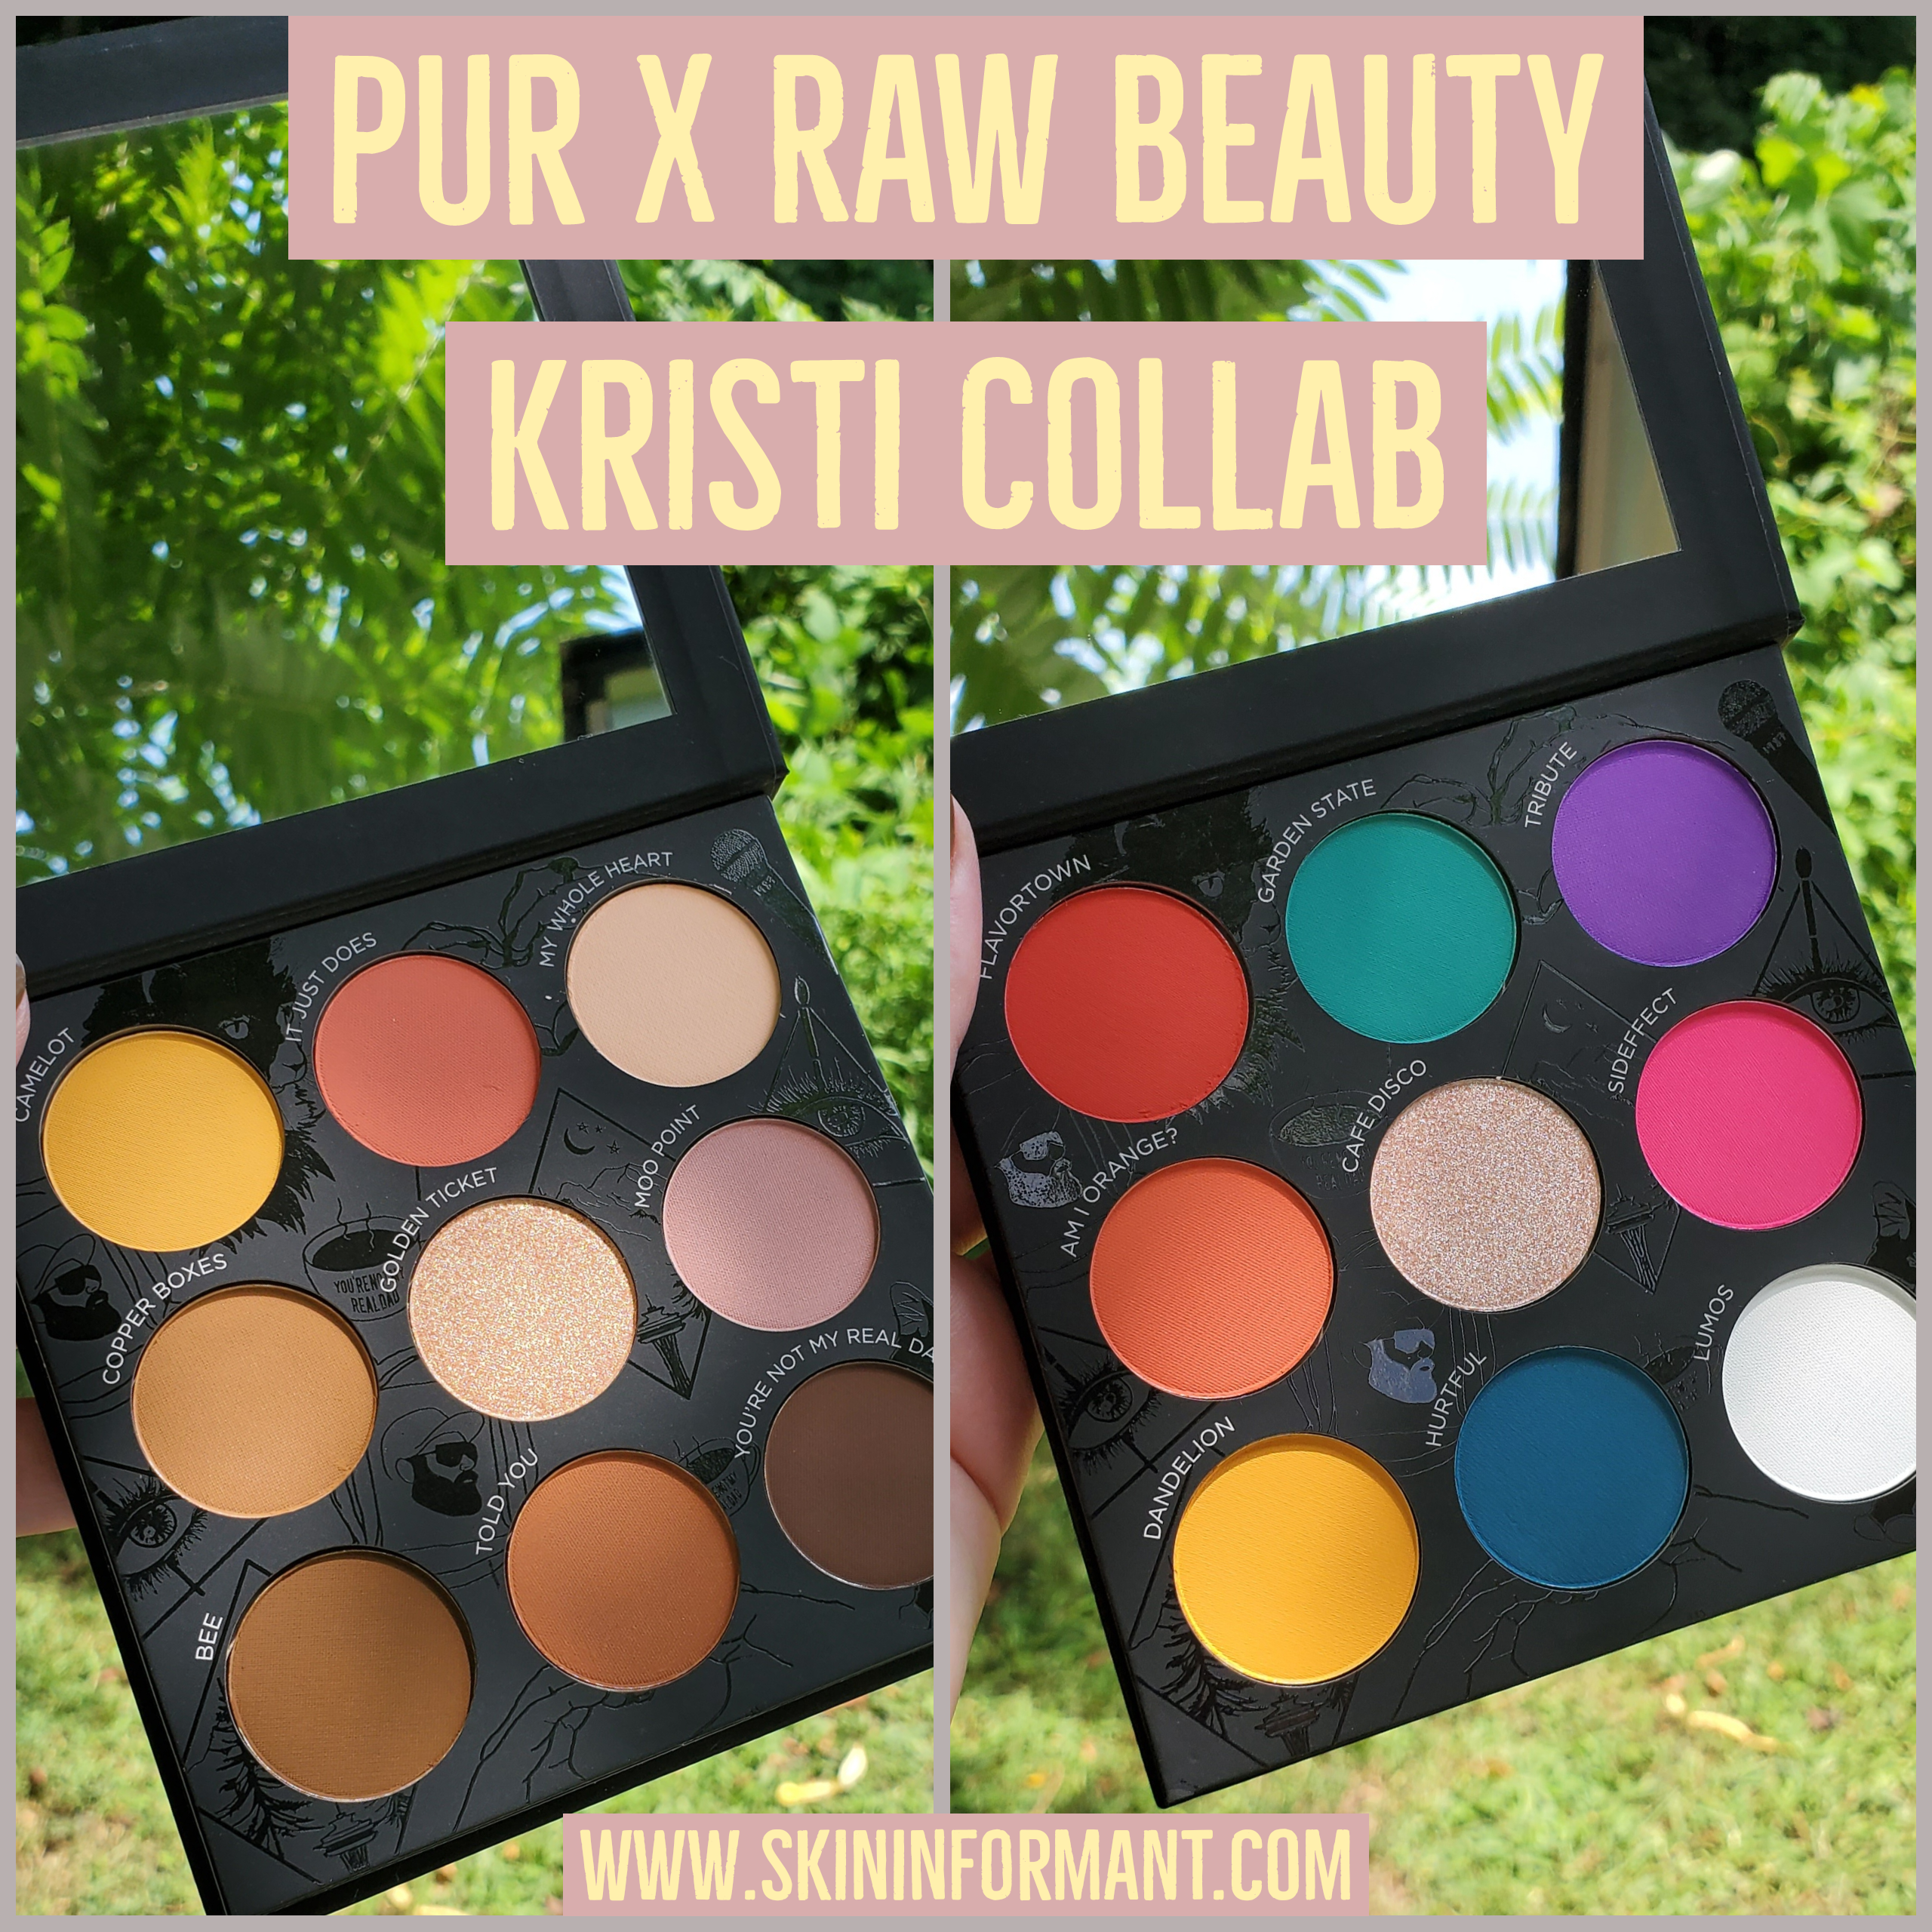 Pur x Raw Beauty Kristi Collaboration Palette Review